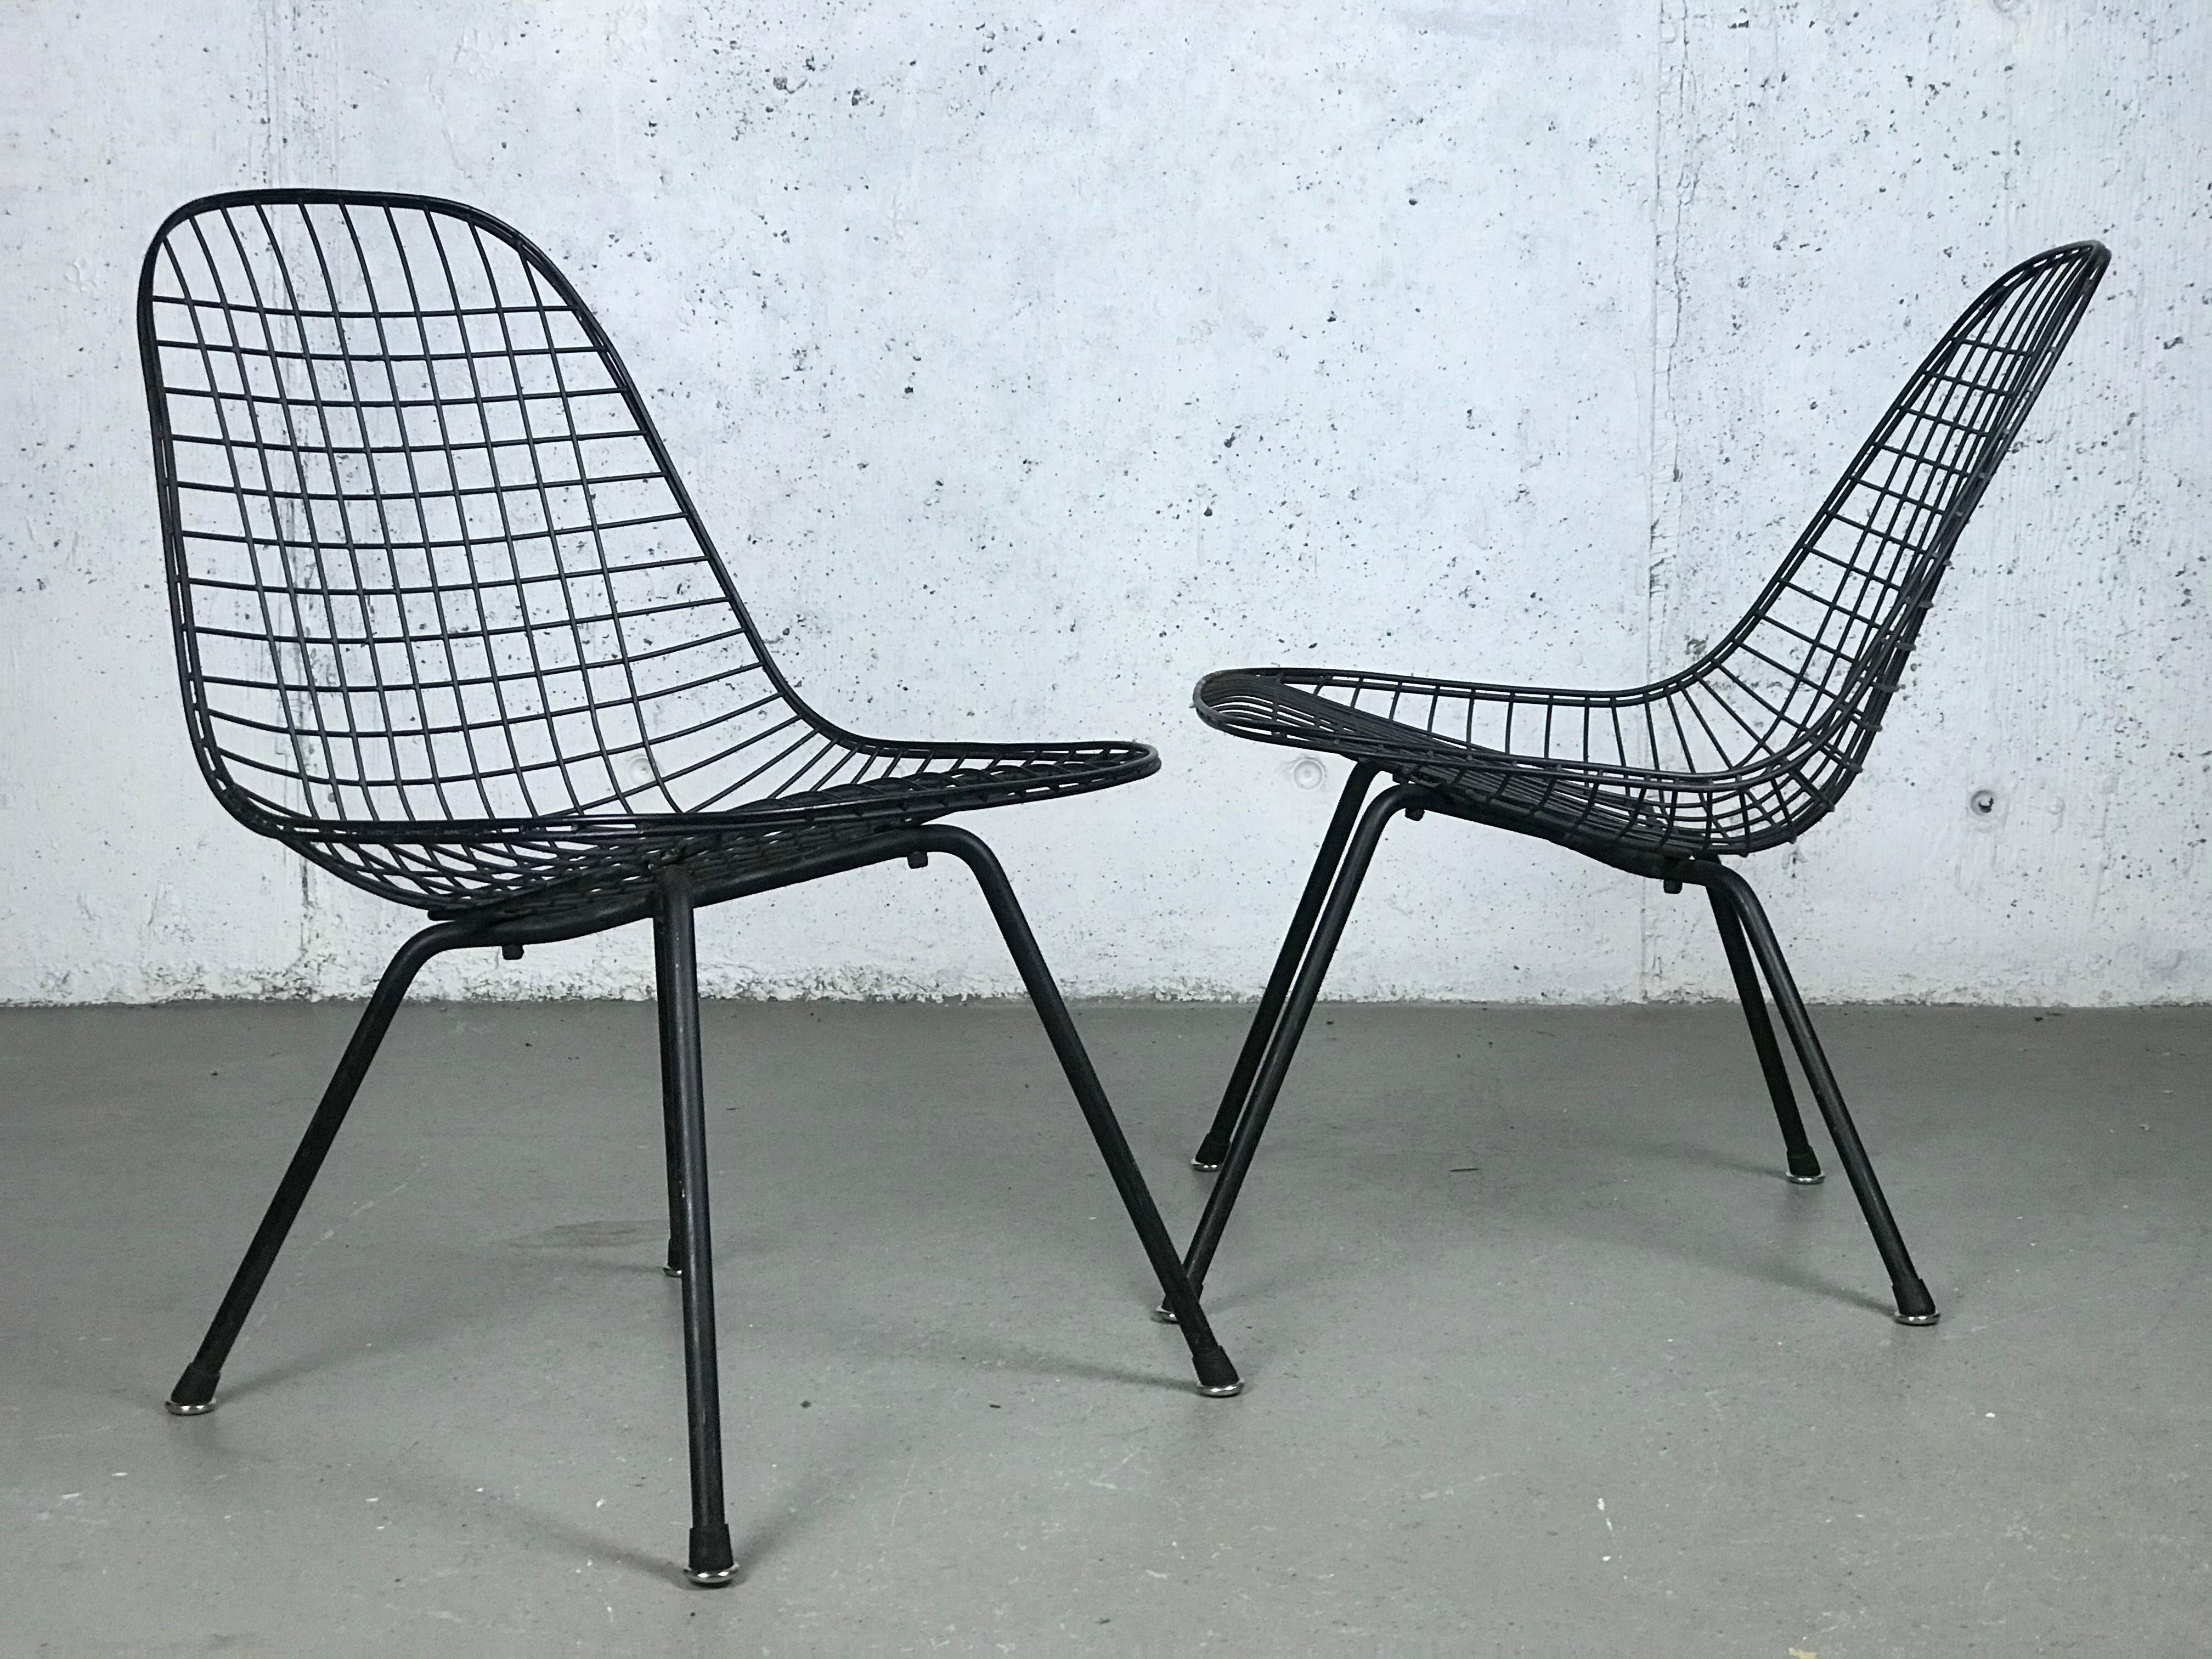 Hard-to-find First Generation Eames LKX (Low/Wire/X-base) lounge chairs, only made one year with this configuration; 1951. Made by Charles & Ray Eames for Herman Miller. 
Various areas of wear/oxidation, please see pictures. One chair has a small